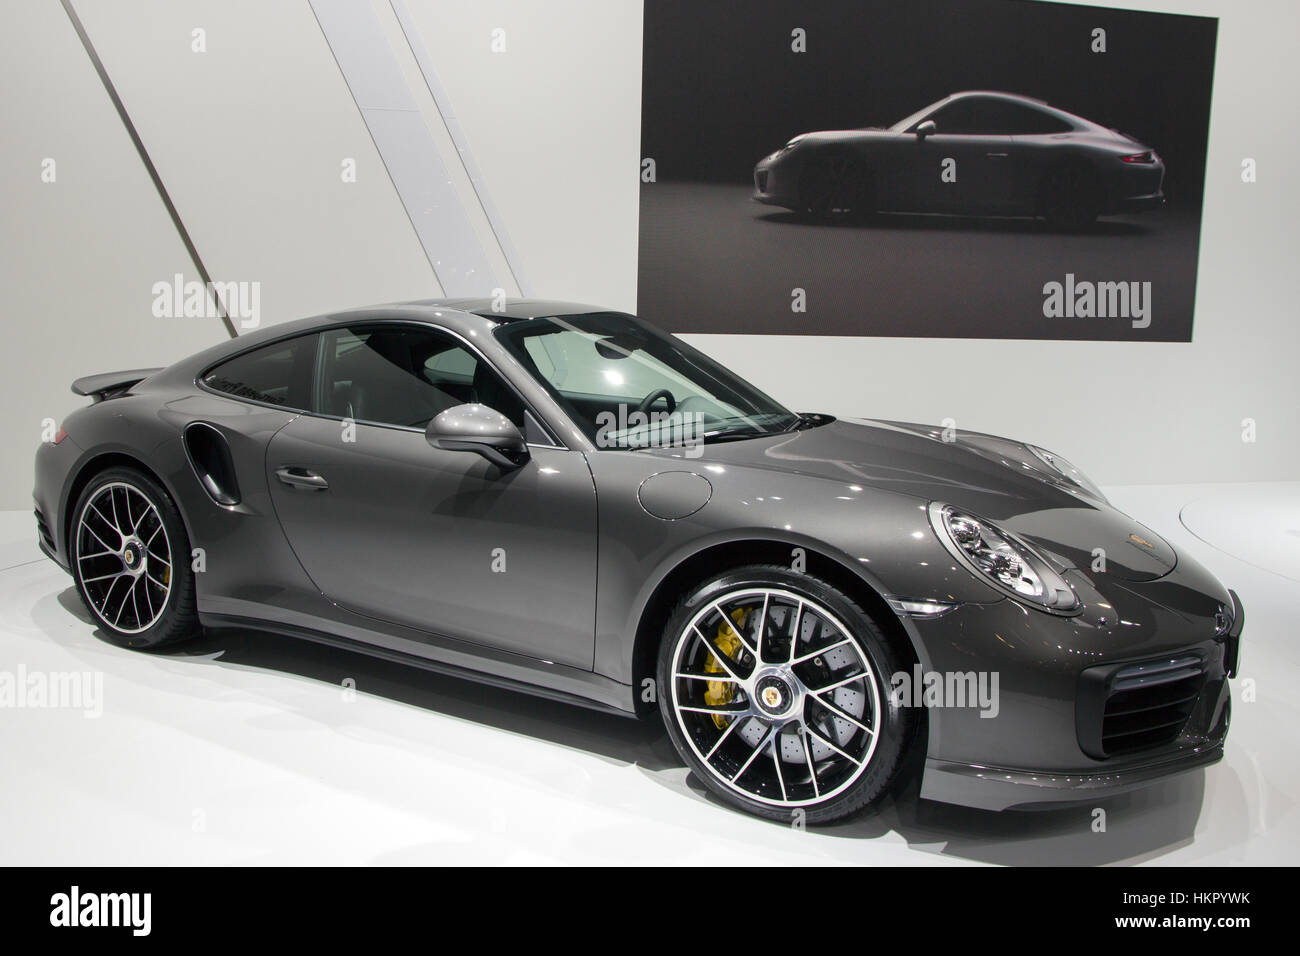 BRUSSELS - JAN 12, 2016: New Porsche 911 Turbo S on display at the Brussels Motor Show. Stock Photo